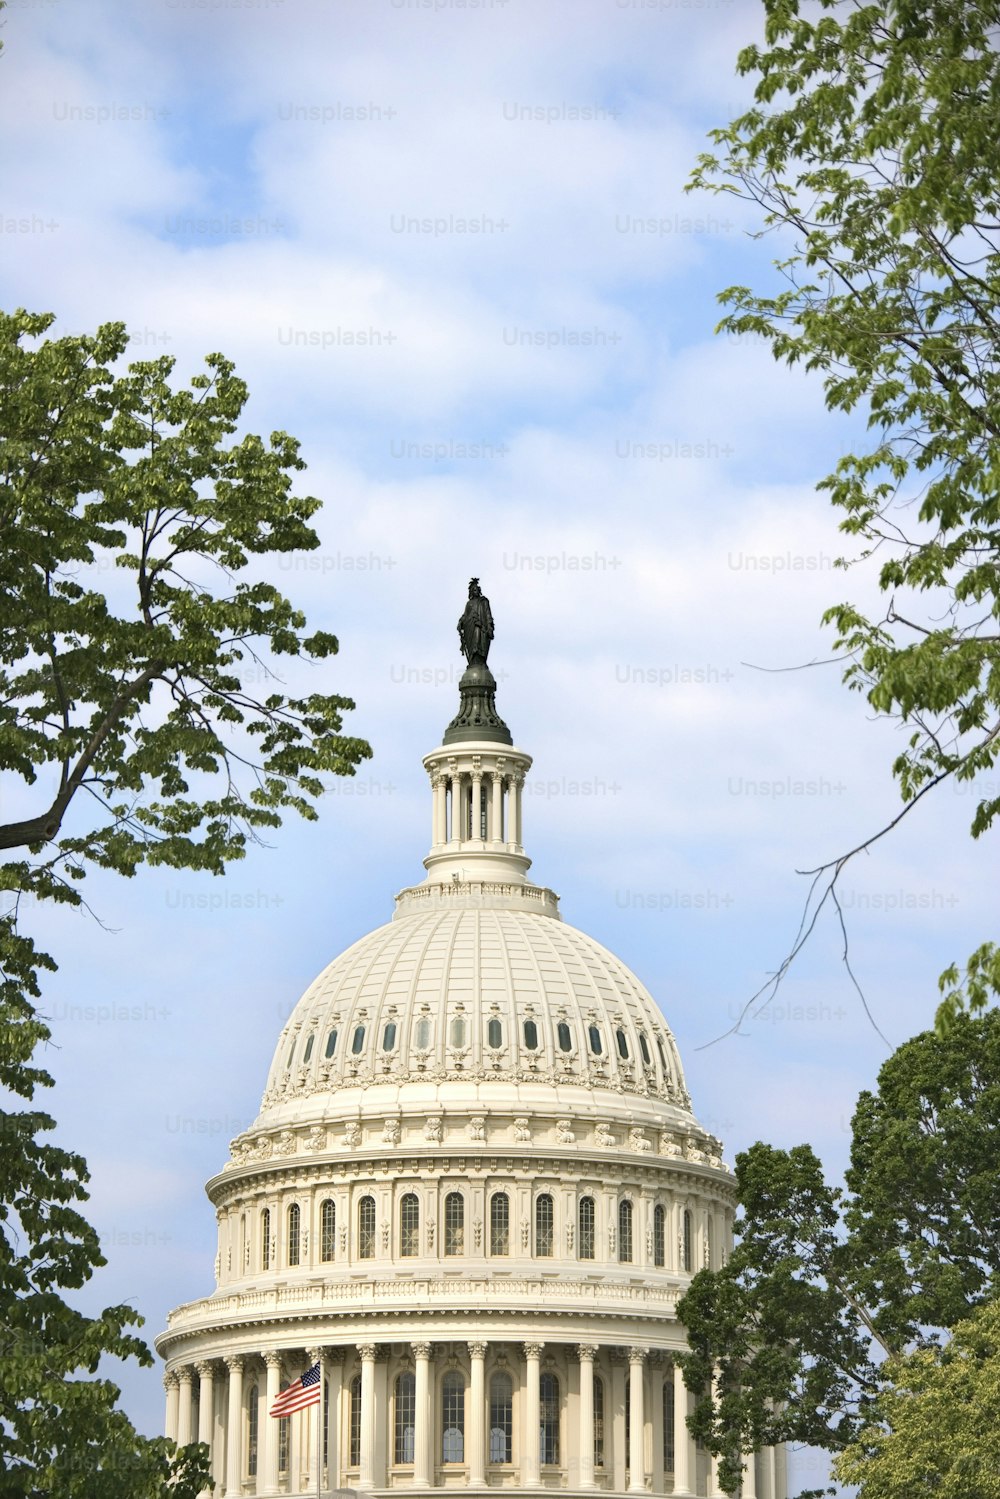 the dome of the capitol building with a statue on top